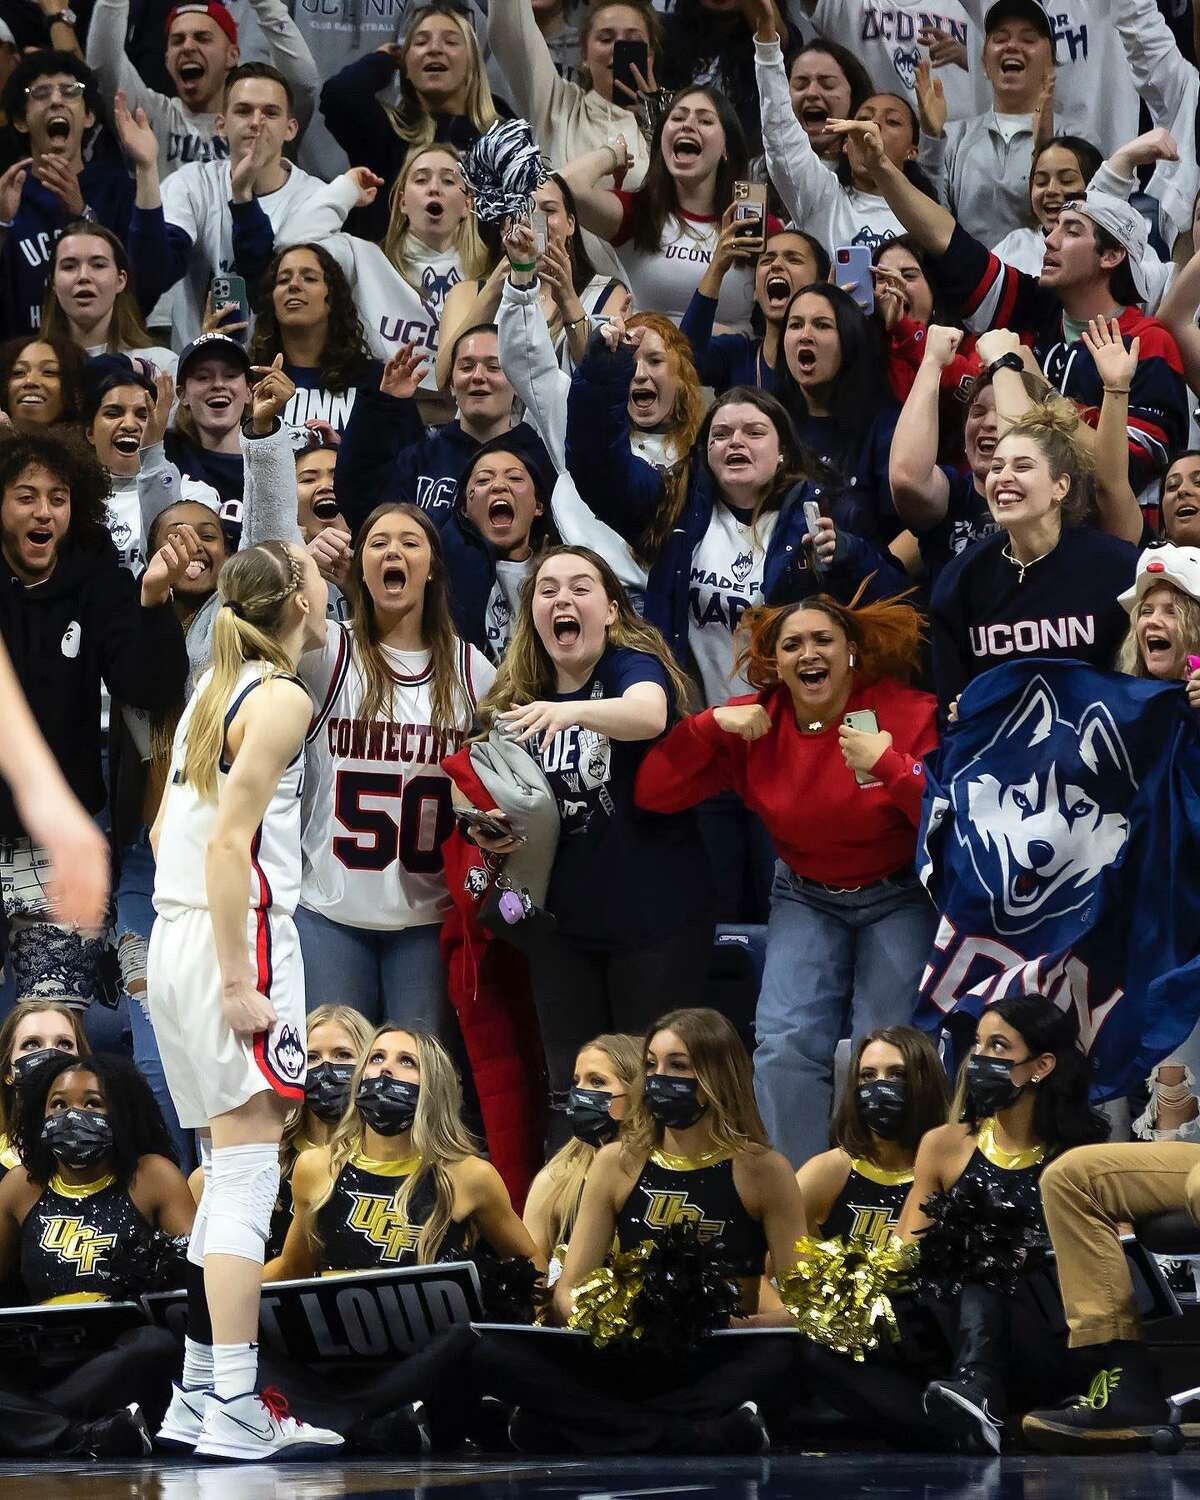 Taylor Coonan (center with dark jacket and white shirt) and Camryn Walsh (left of Coonan) were part of the student section reacting to Paige Bueckers during UConn’s win over UCF Monday, March 21, 2022. The UConn photo went viral on social media this week.